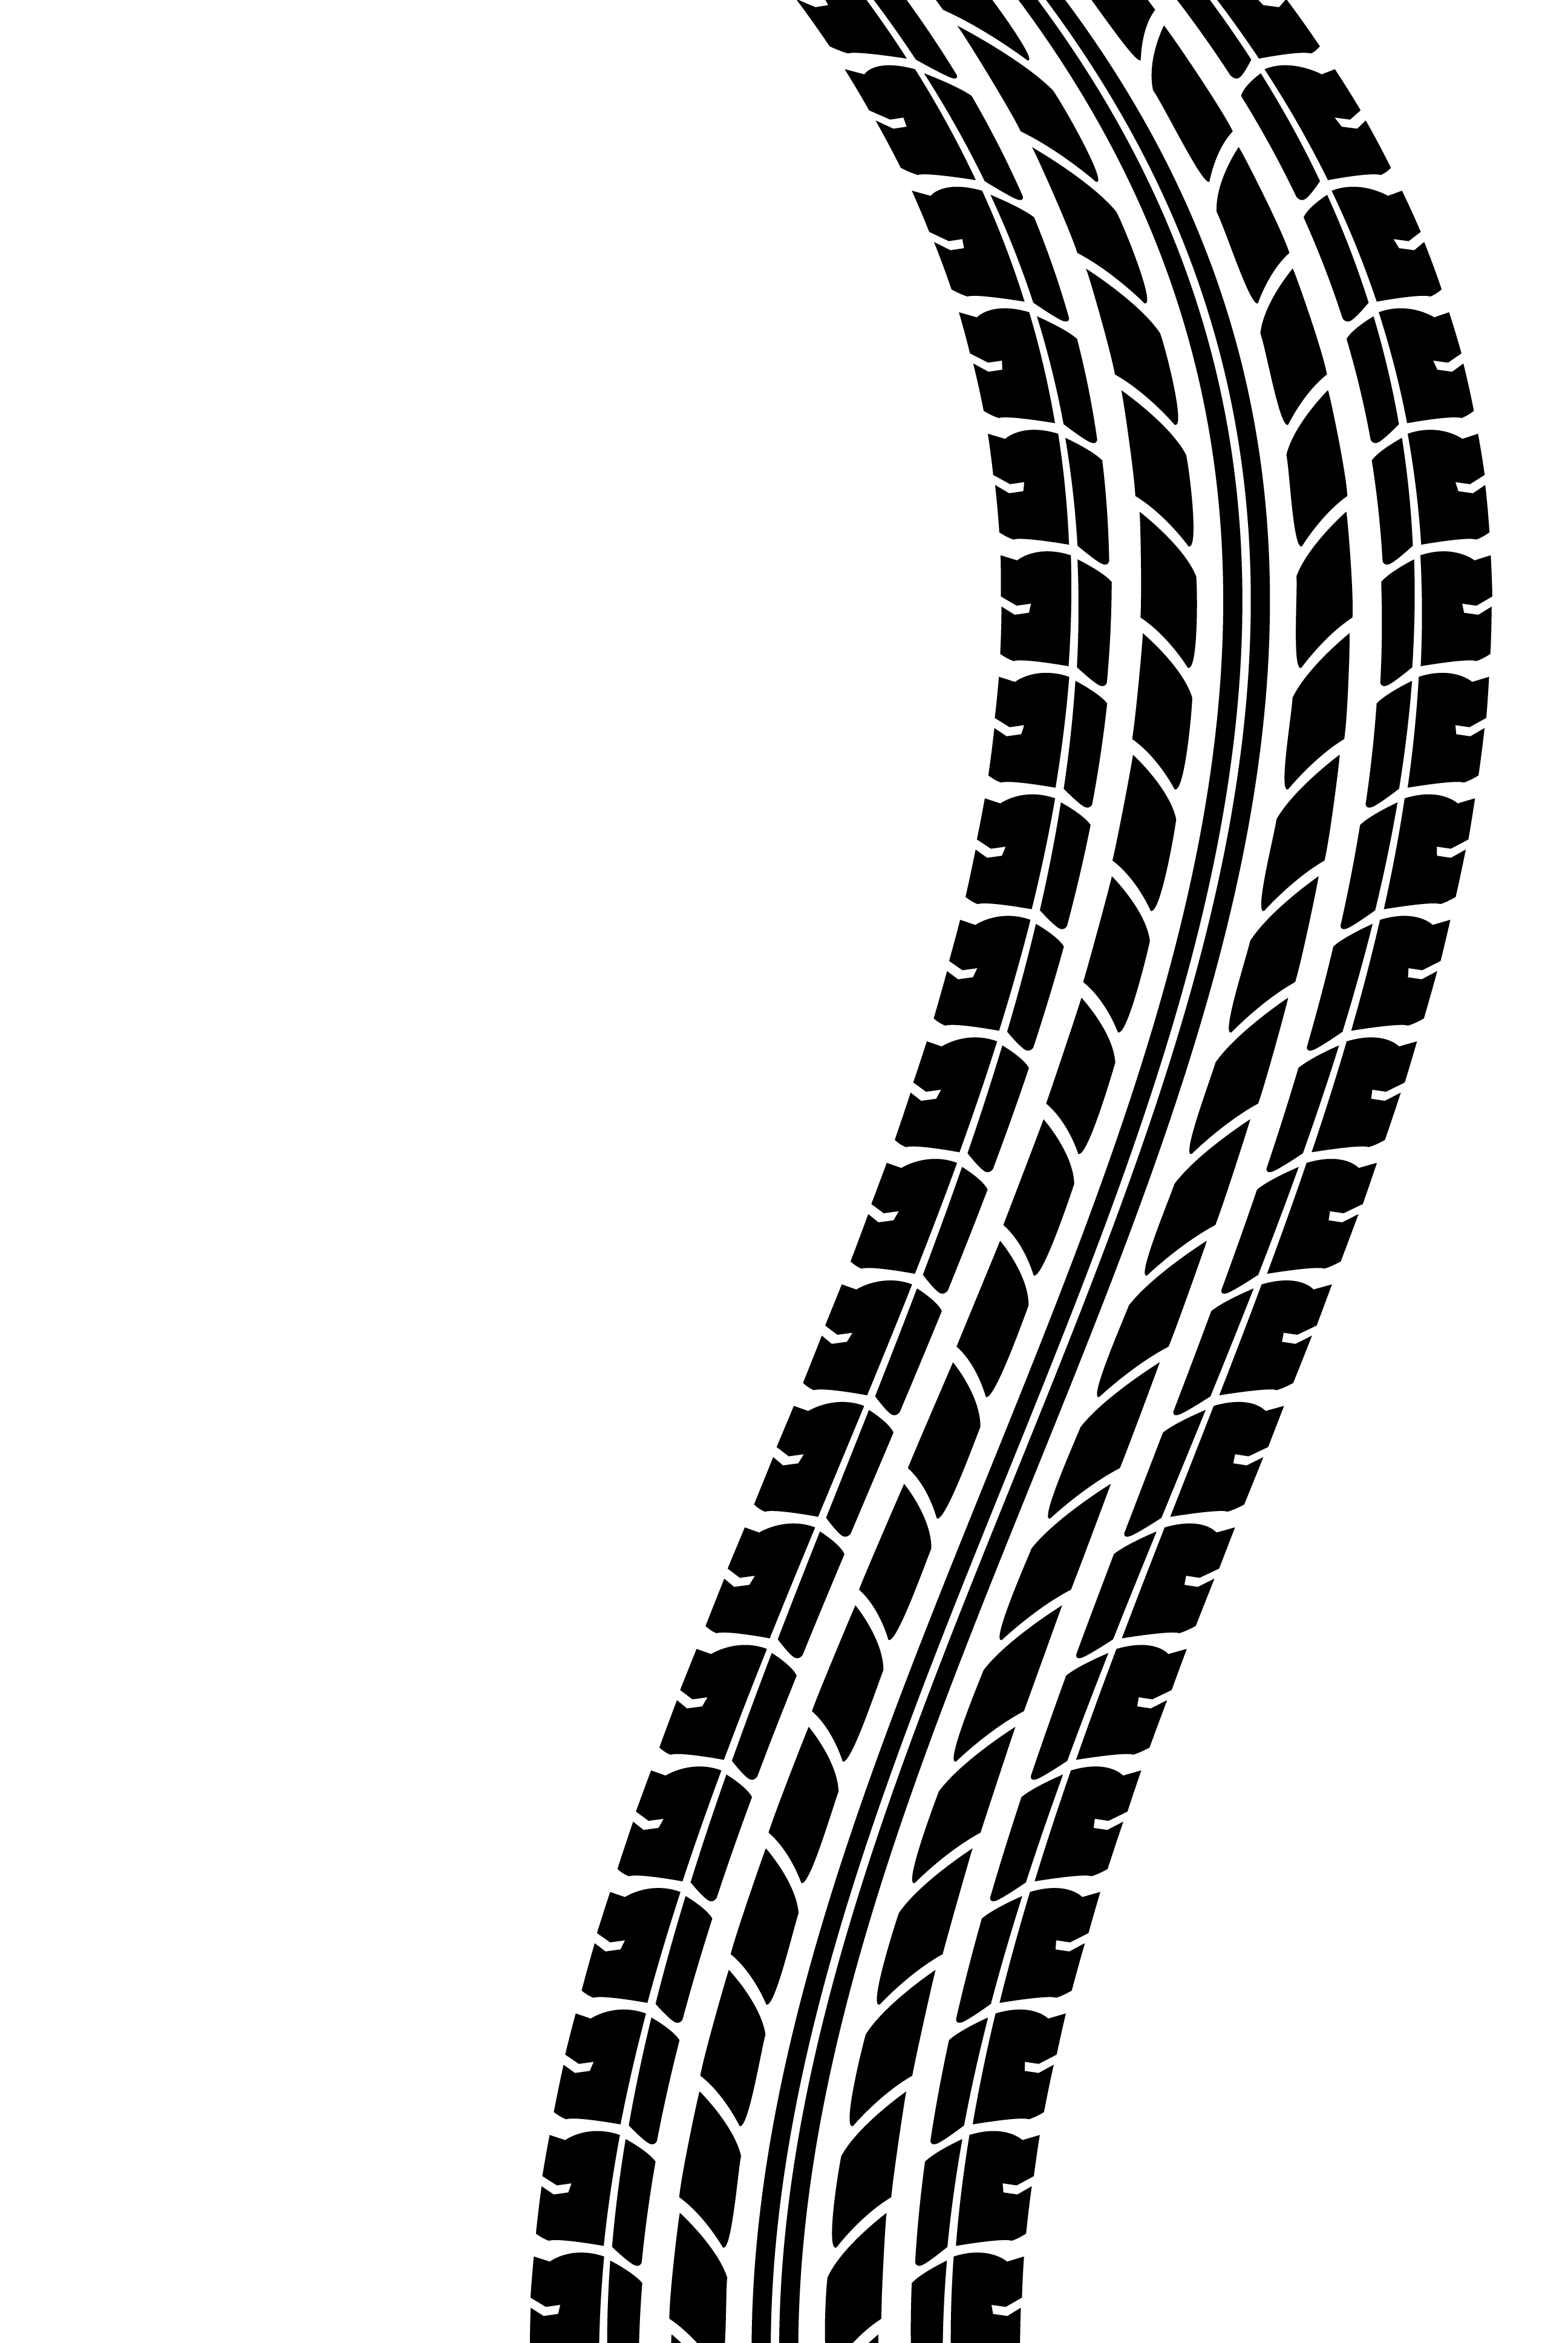 Motorcycle Tire Tracks Clipart